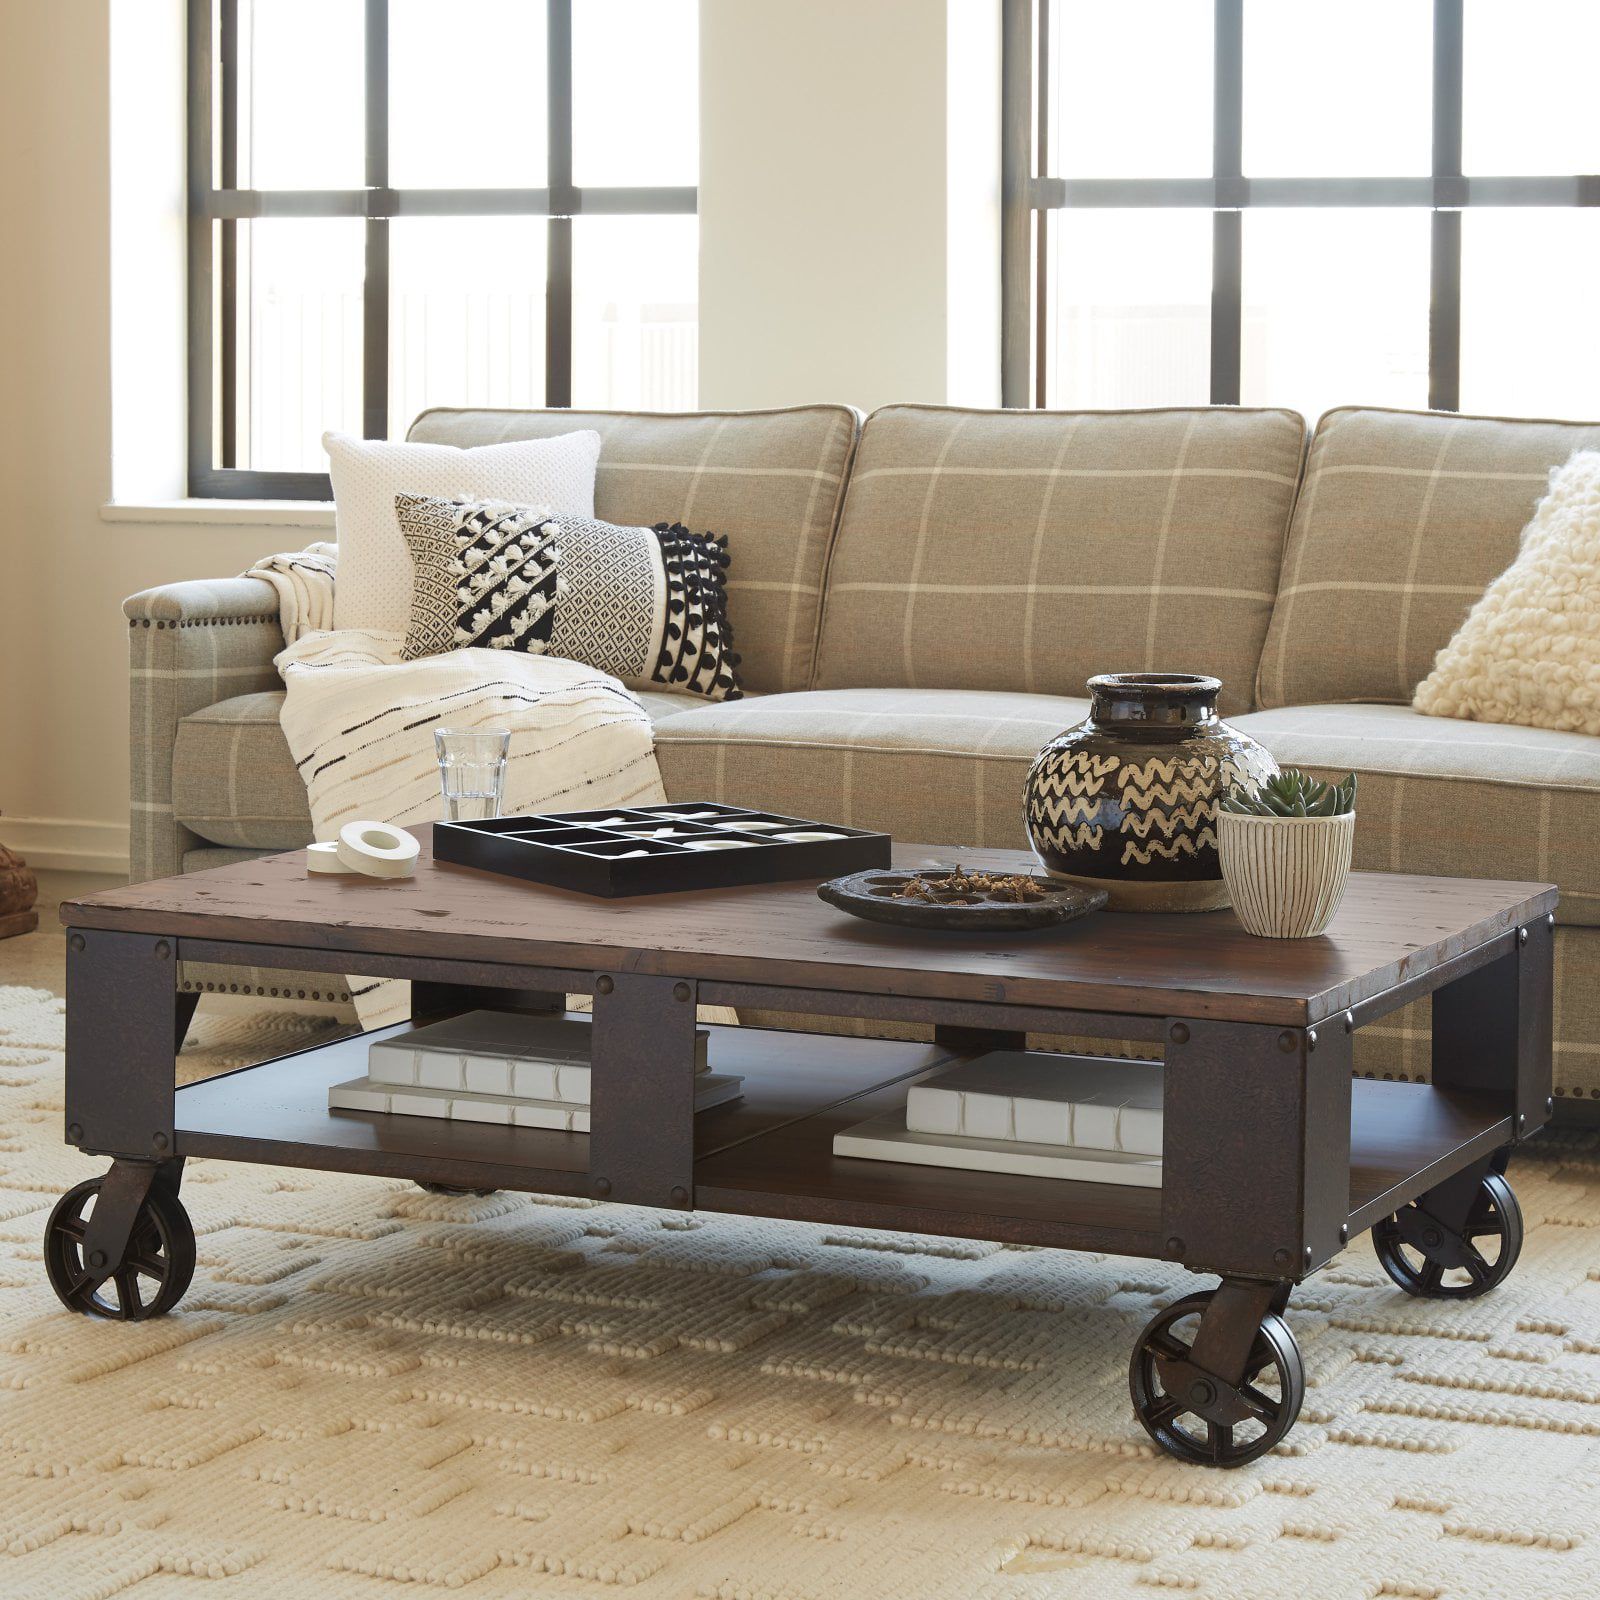 Magnussen T1755 Pinebrook Wood Rectangular Coffee Table With 2 Braking With Coffee Tables With Casters (Gallery 1 of 21)